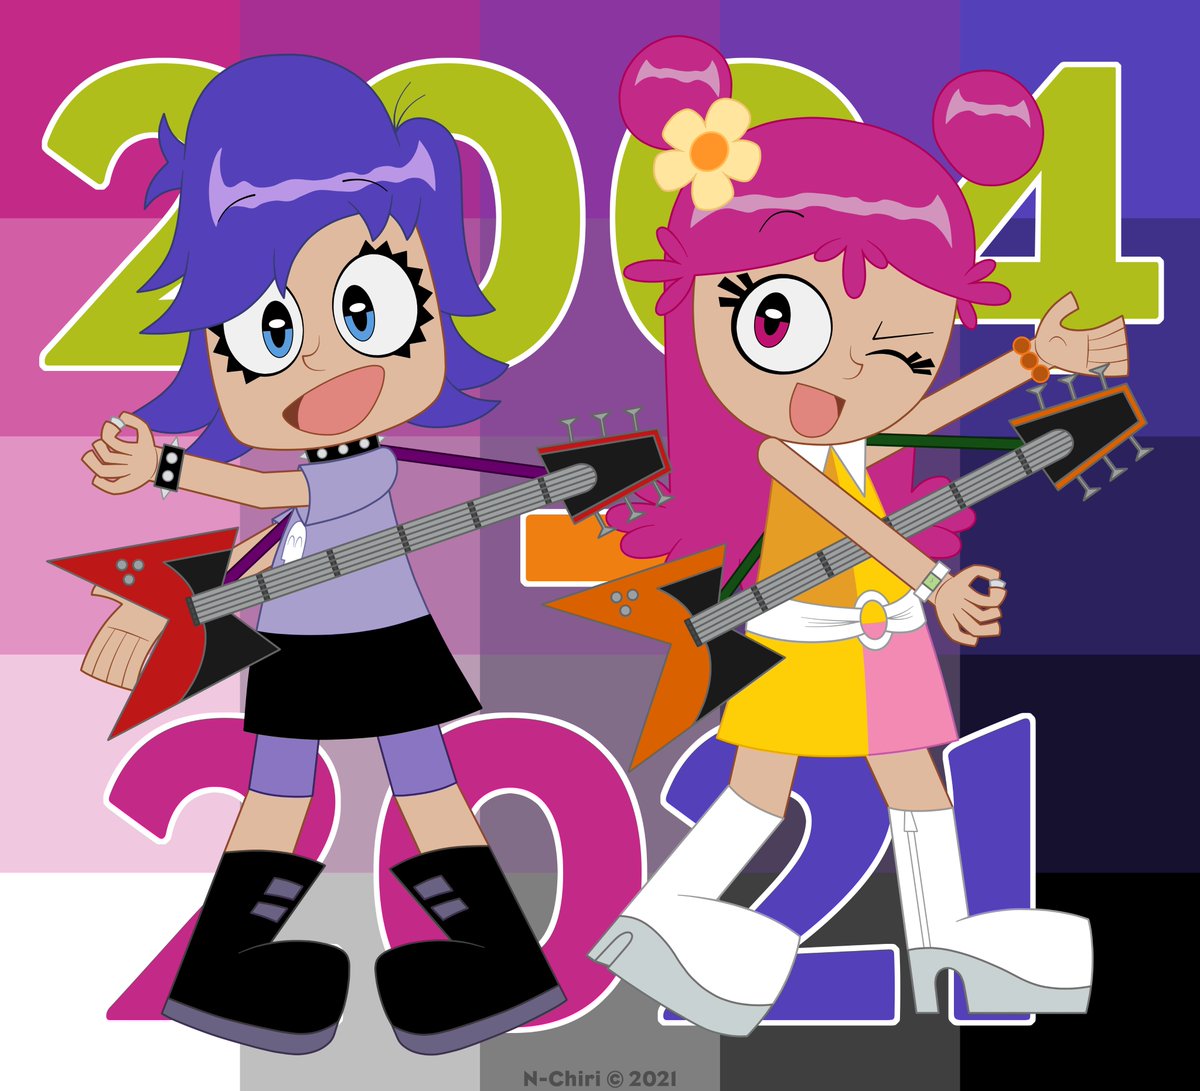 Today is the 17th anniversary of my most favorite childhood show, #HiHiPuffyAmiYumi by #CartoonNetwork and #RenegadeAnimation. Rock on!